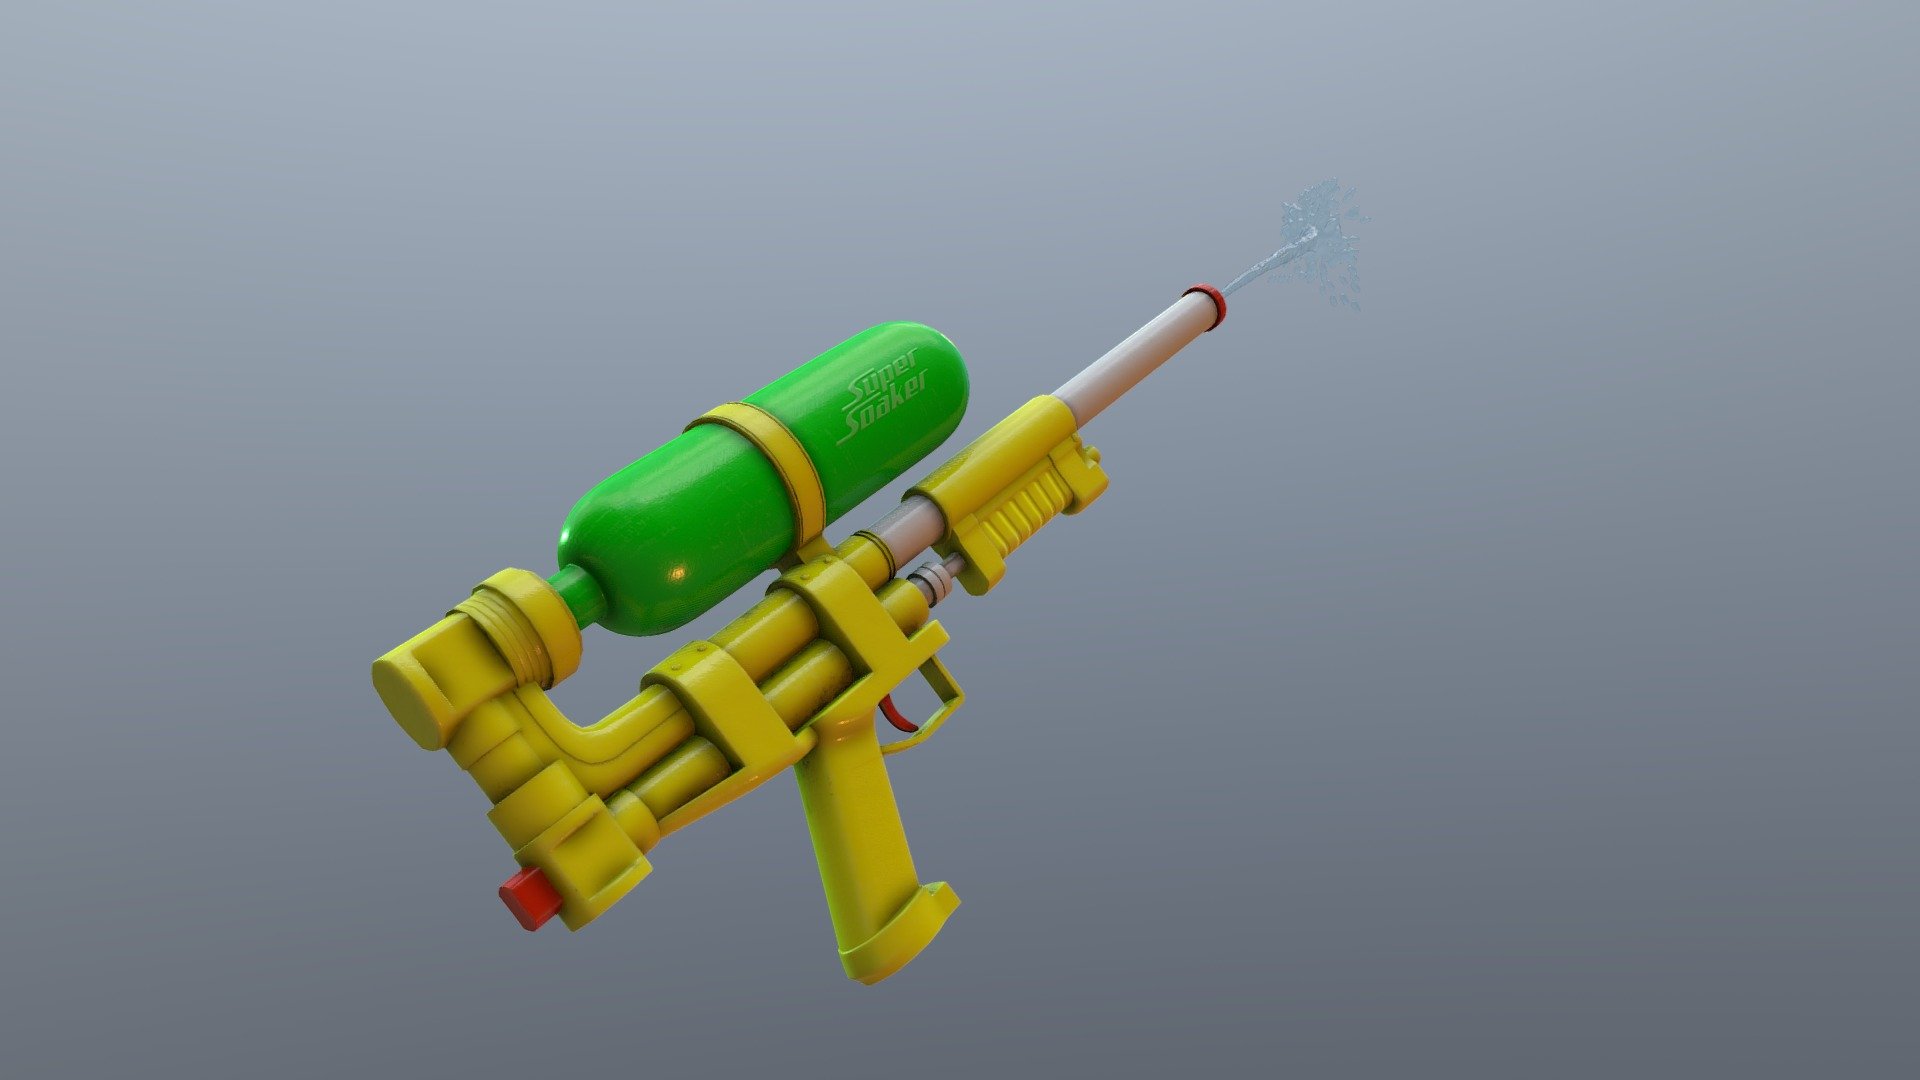 Retro Super Soaker made as a lunch break project. 

Modelled in Maya and textured in Substance Painter. Created the water squirt with nParticles converted into Geomerty. 

Modelled to subdivide so uploaded model is a smoothed version of the low res model 3d model